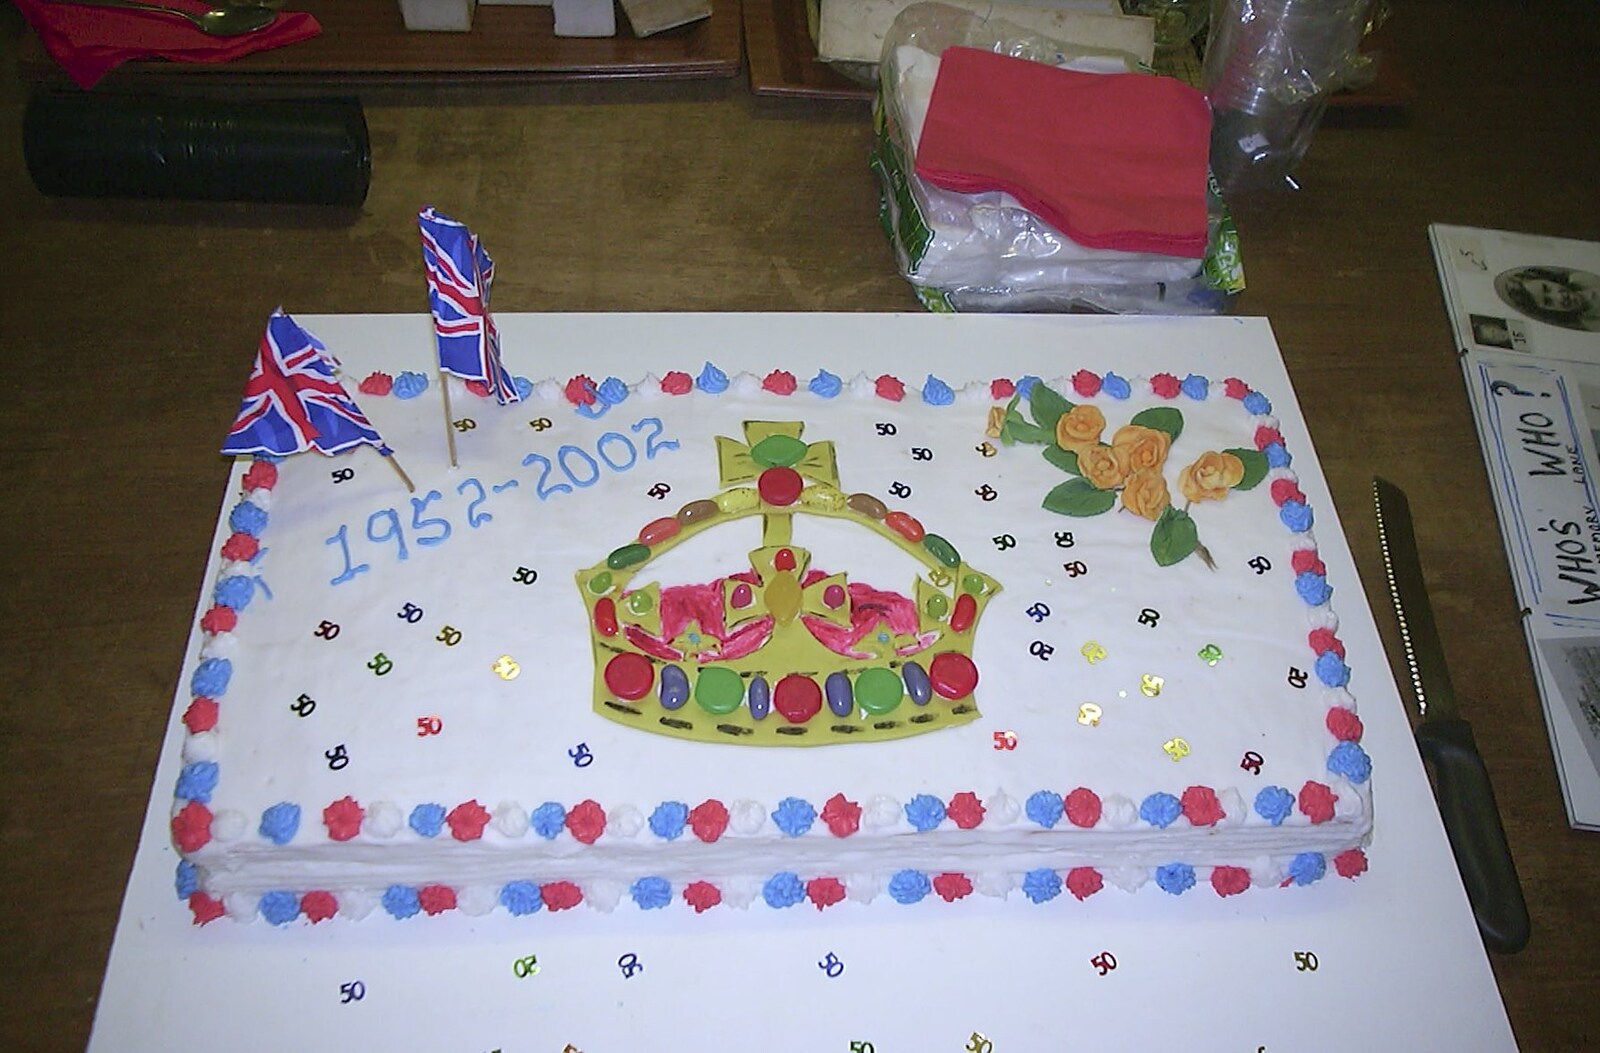 The jubilee cake from Golden Jubilee Celebrations, The Village Hall, Brome, Suffolk - 4th June 2002